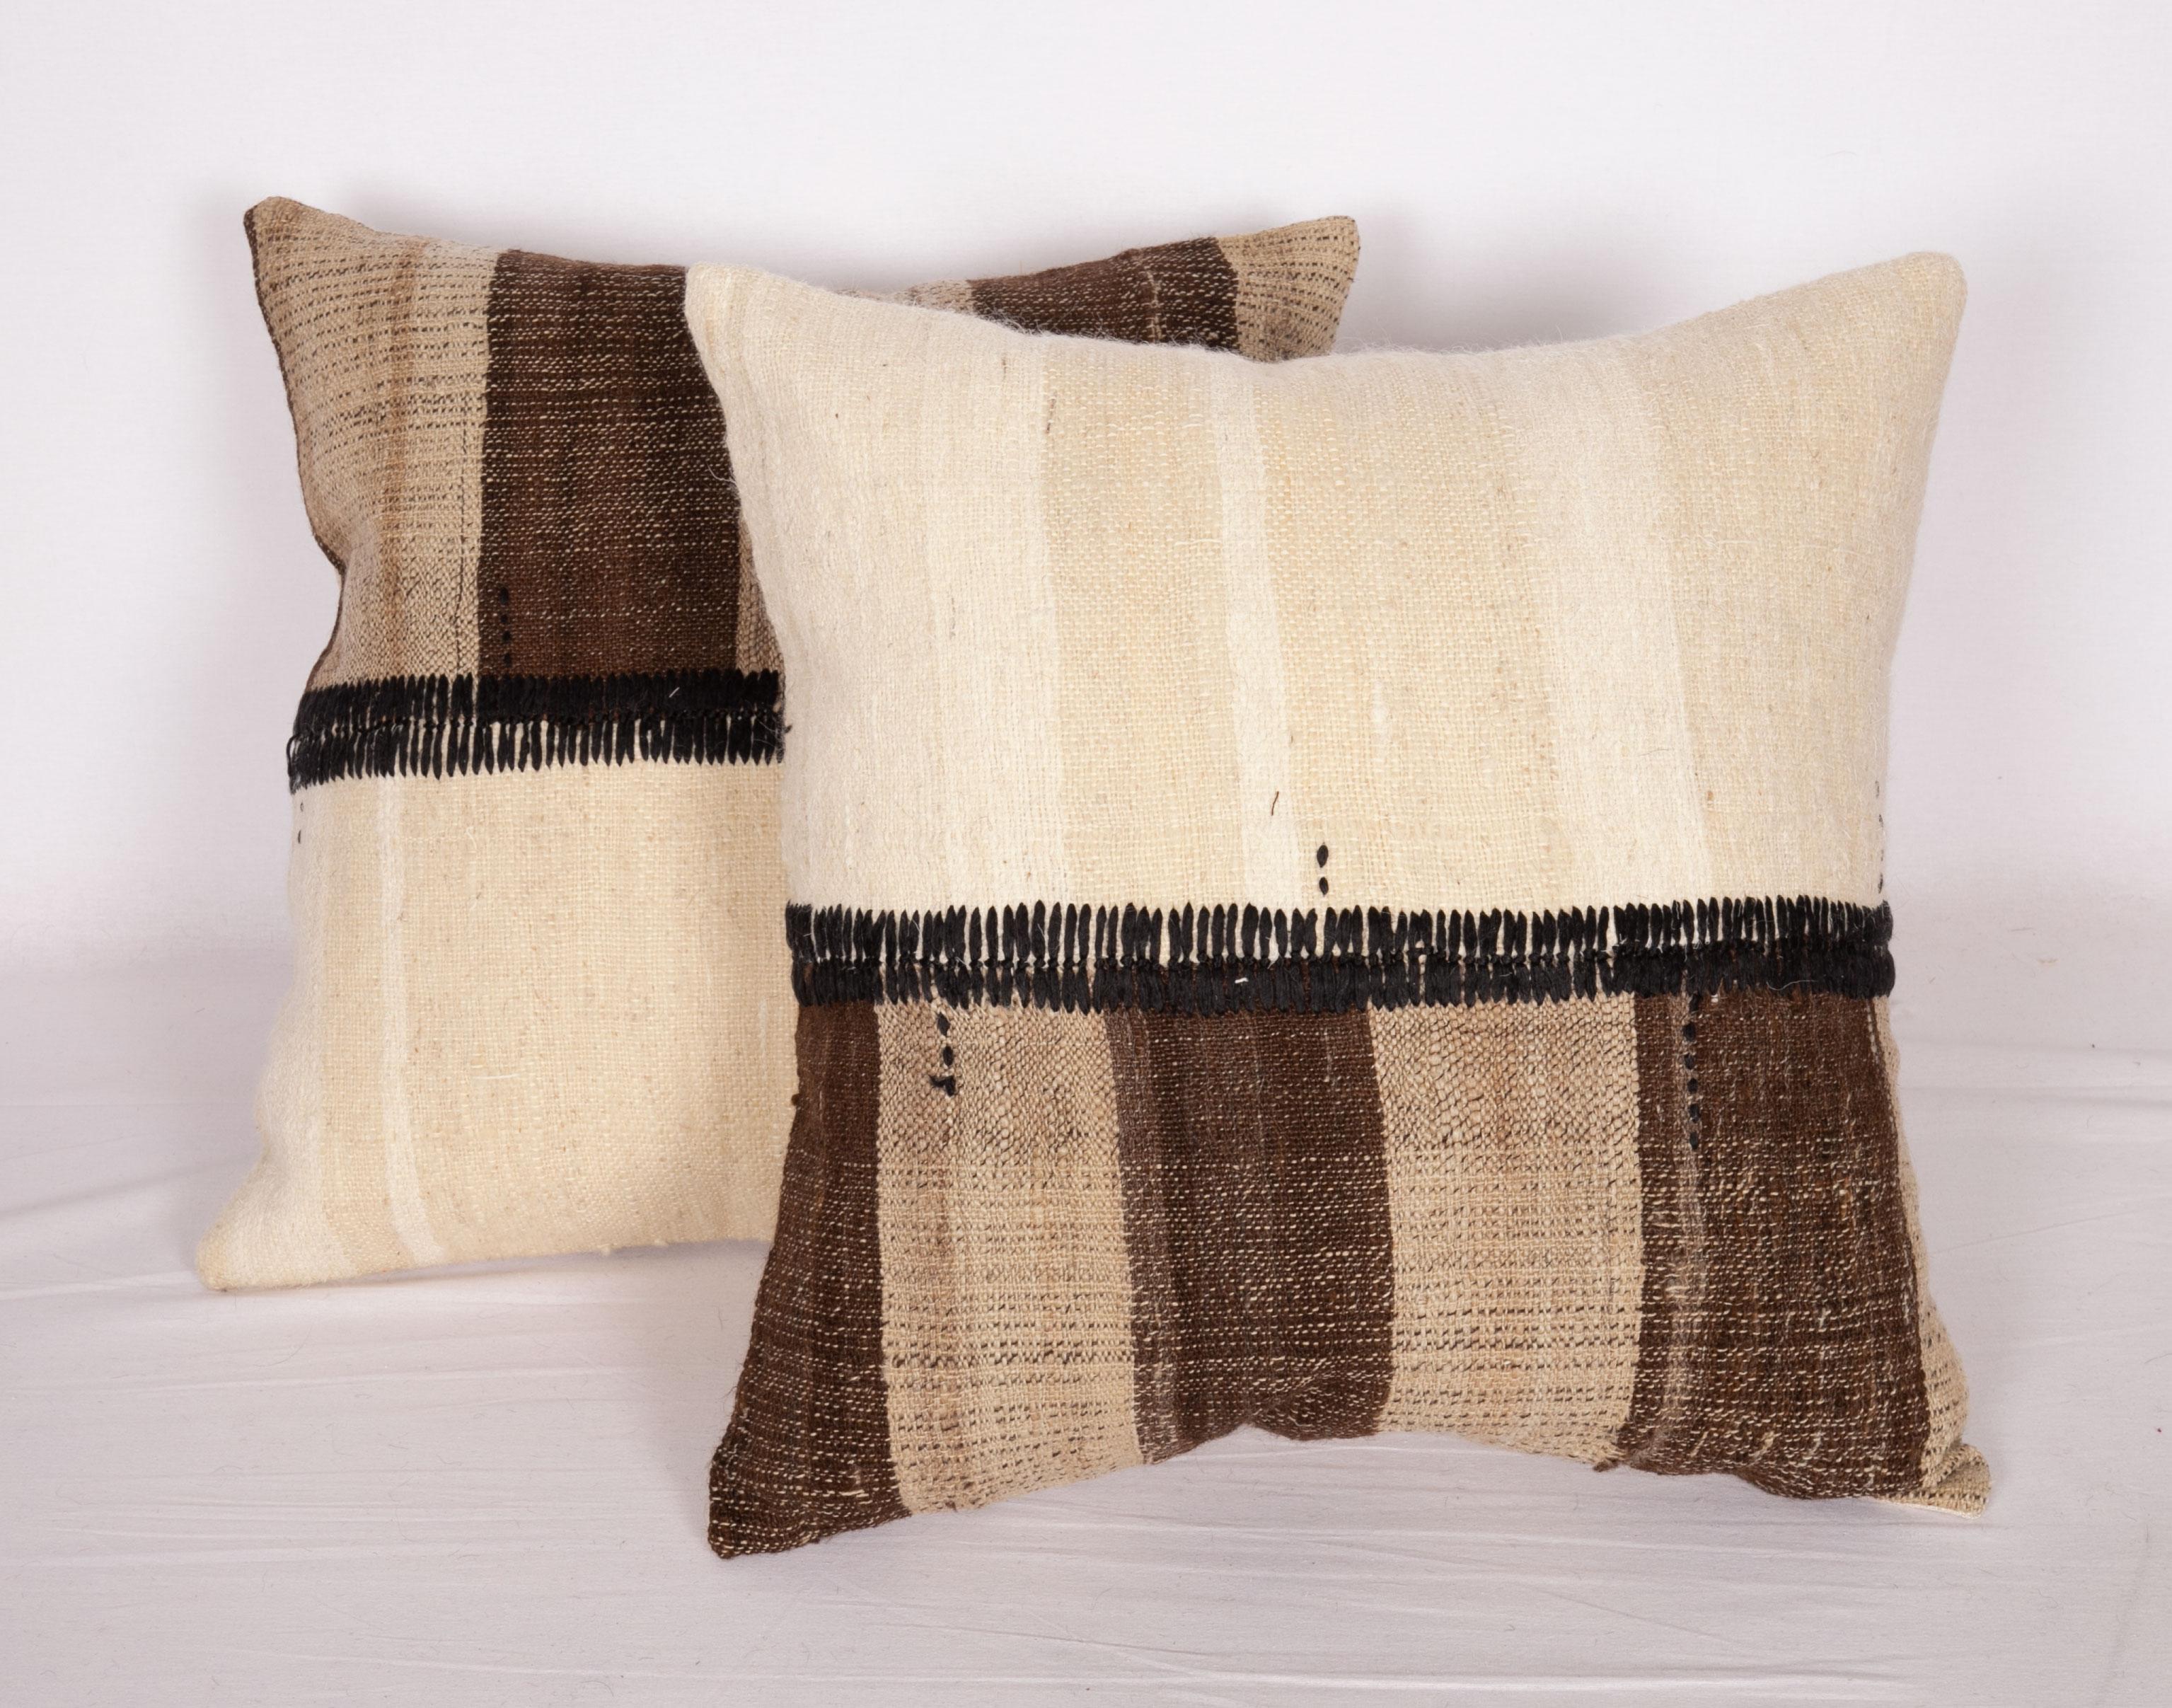 Kilim Neutral Pillowcases Made from an Anatolian Vintage Cover, Mid-20th Century For Sale